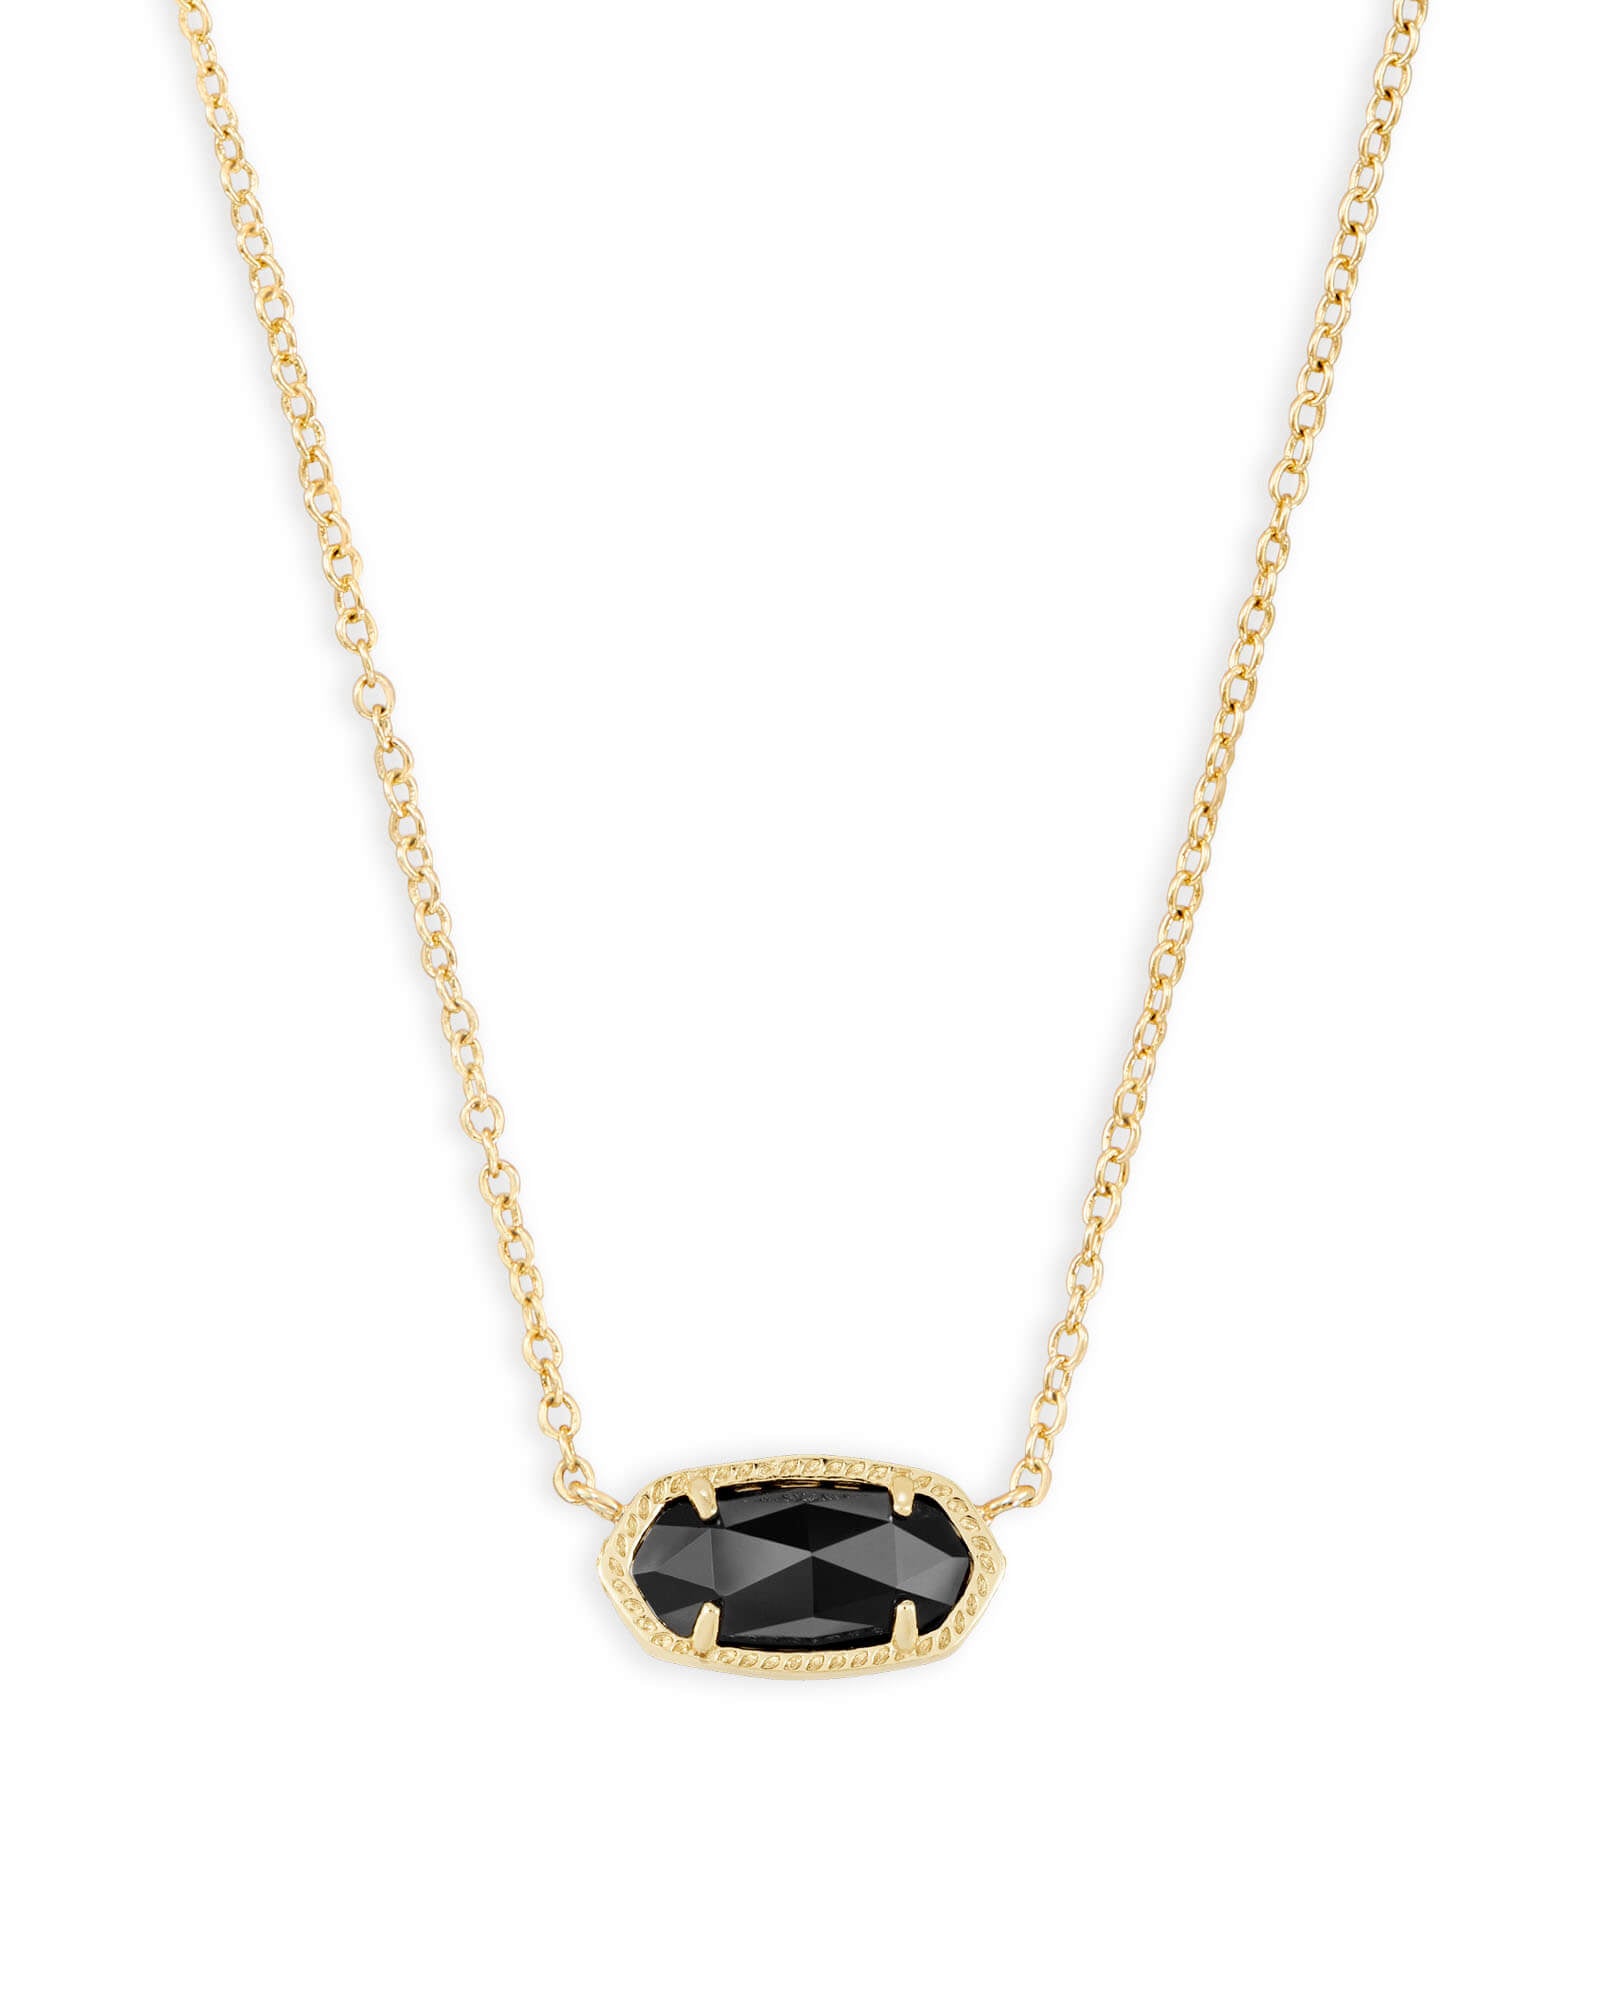 Kendra Scott Framed Elisa Y Necklace in White Mosaic Glass | REEDS Jewelers